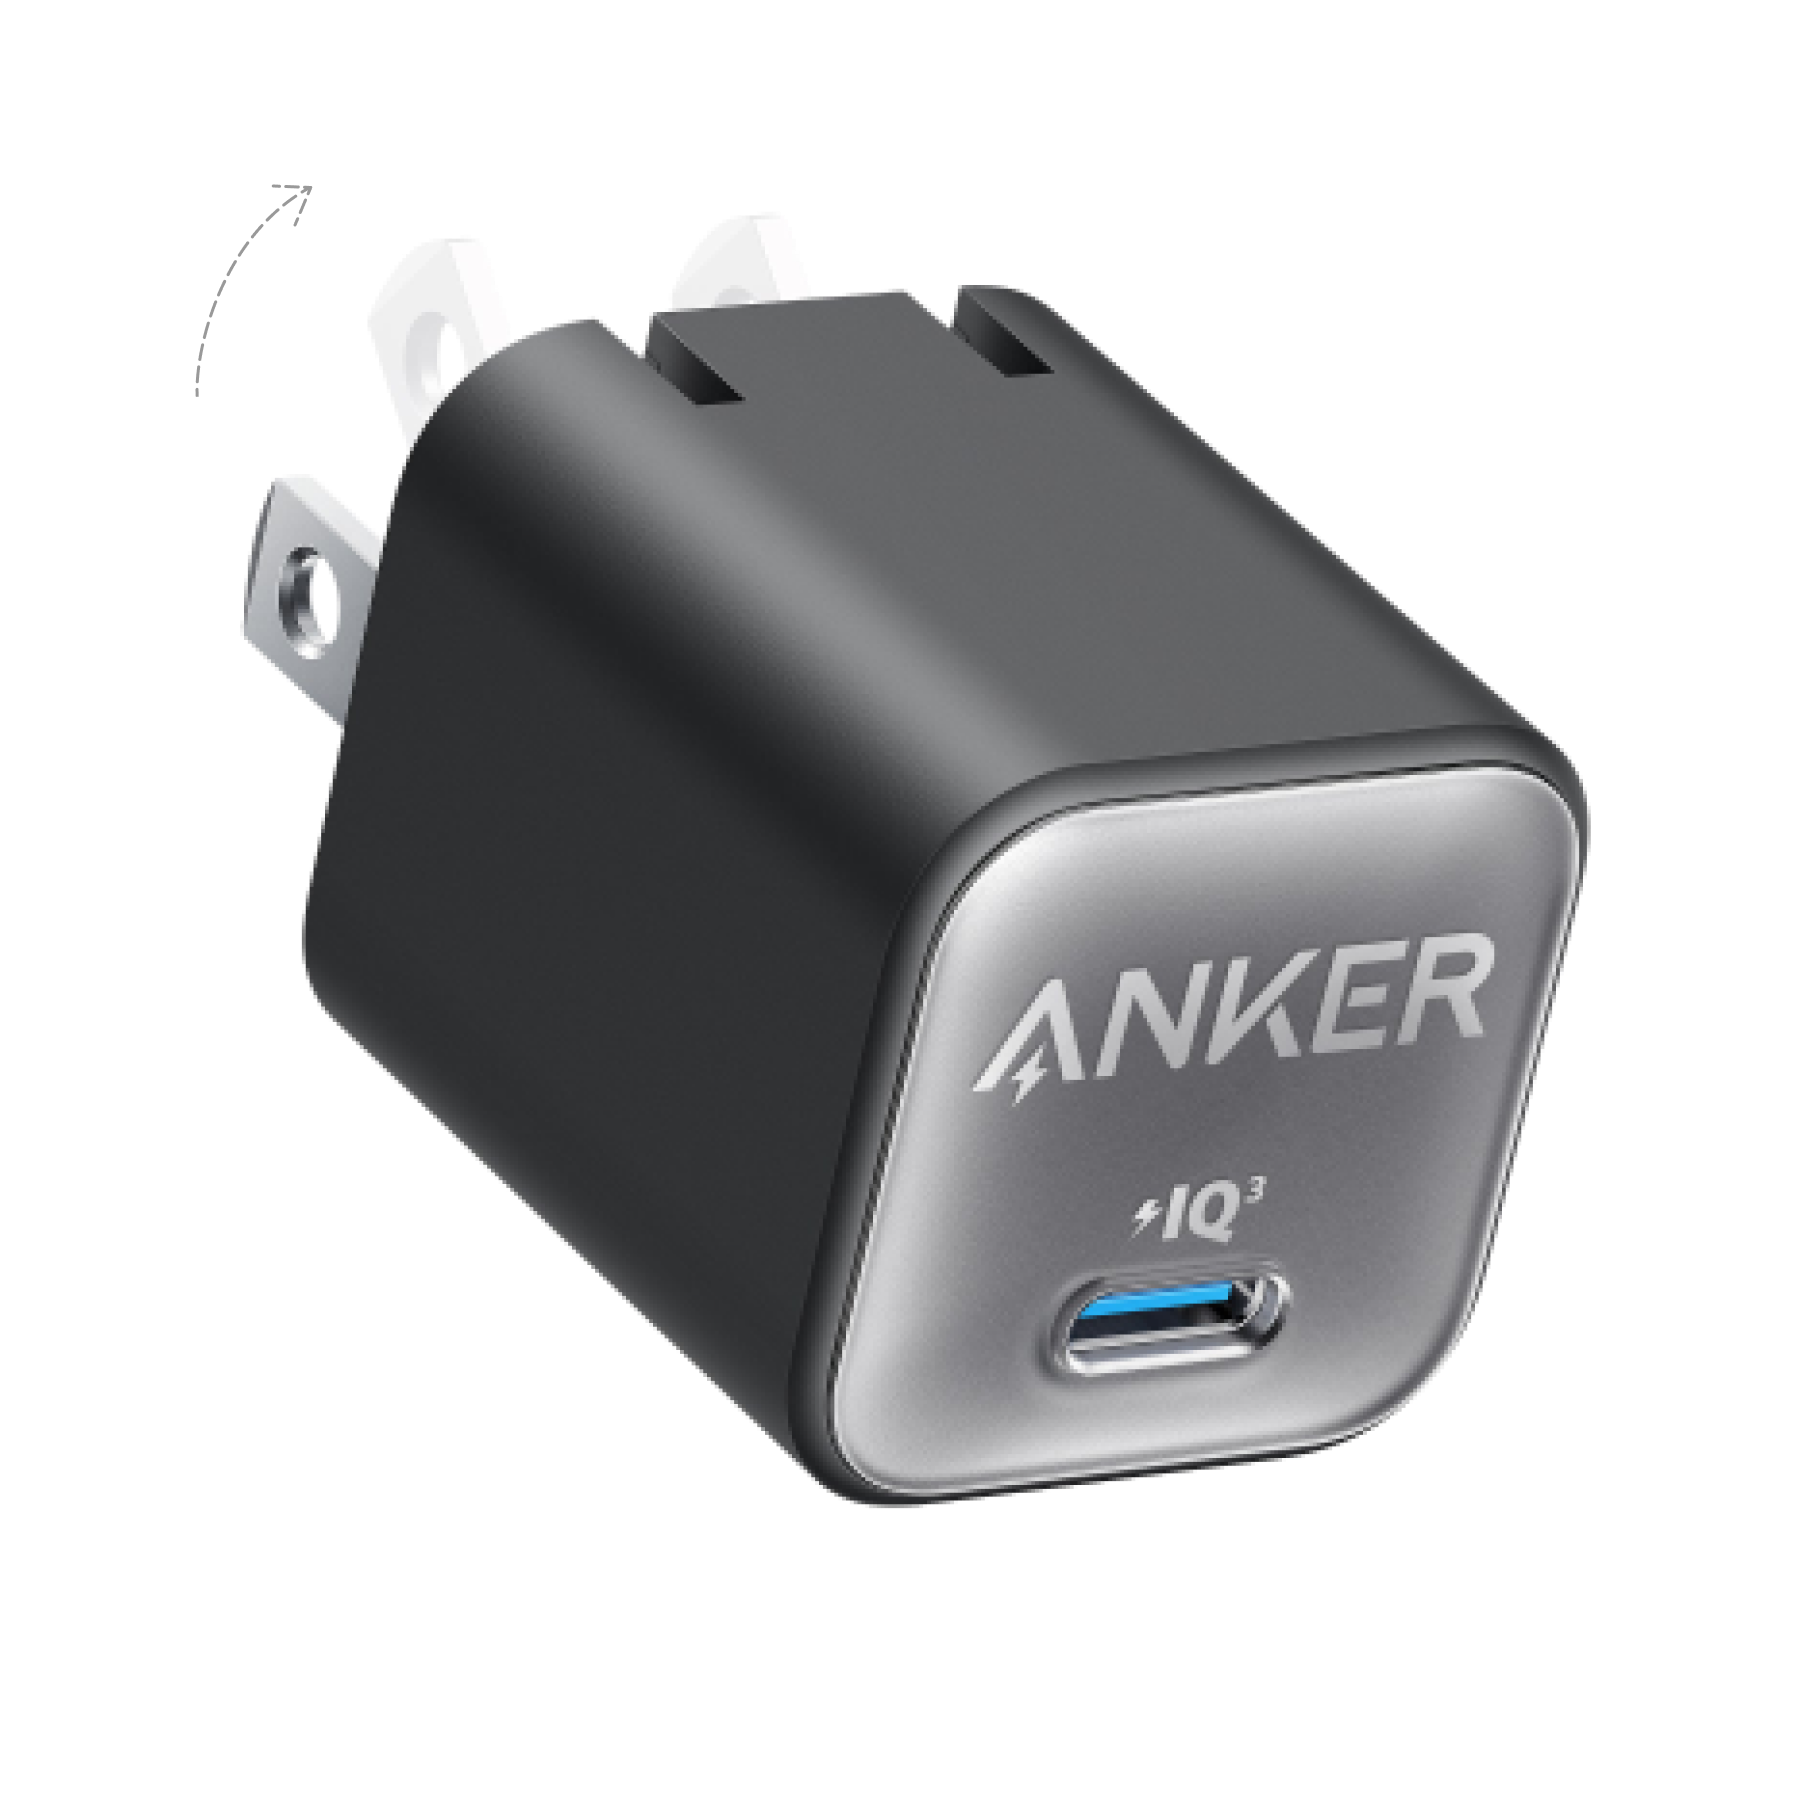 Anker 511 Charger (Nano 3, 30W) with USB-C to Lightning Cable (6ft